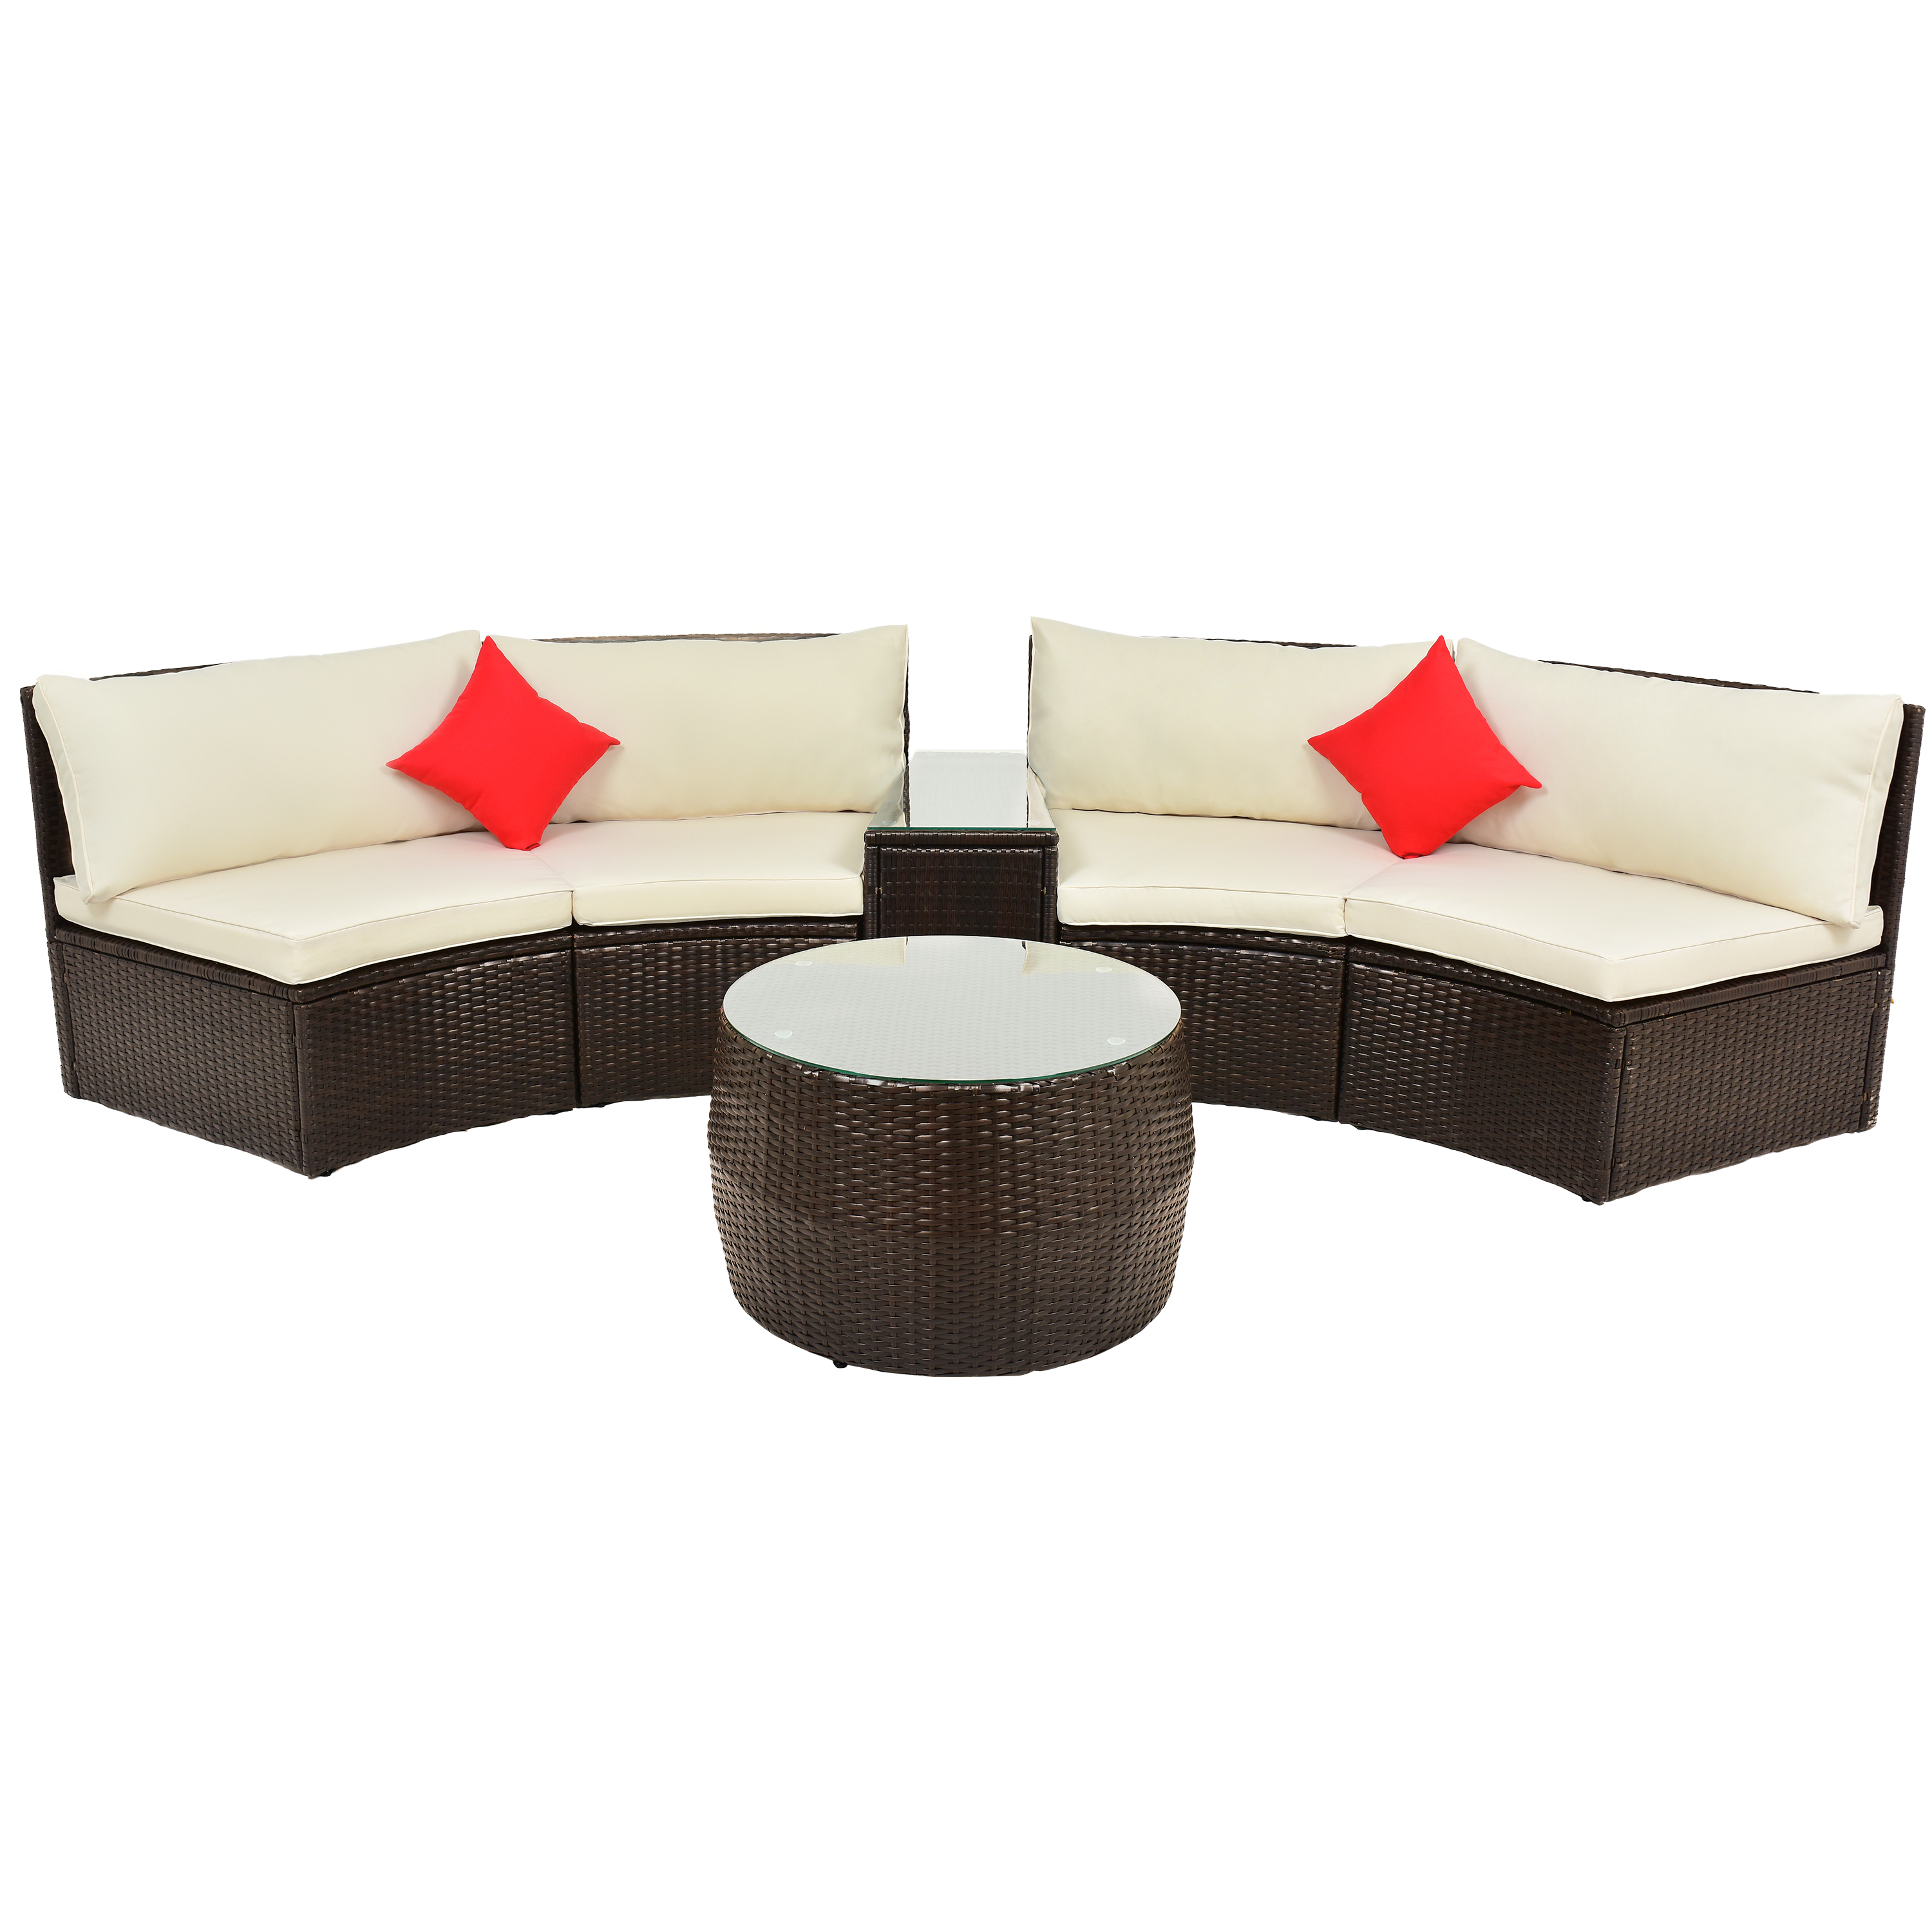 enyopro 4 Piece Patio Wicker Furniture Sets, Half-Moon Sectional Furniture Sofa Set with Round Coffee Table, Cushions & Pillows, PE Rattan Conversation Set for Patio, Poolside, Backyard, Garden, B144 - image 3 of 10